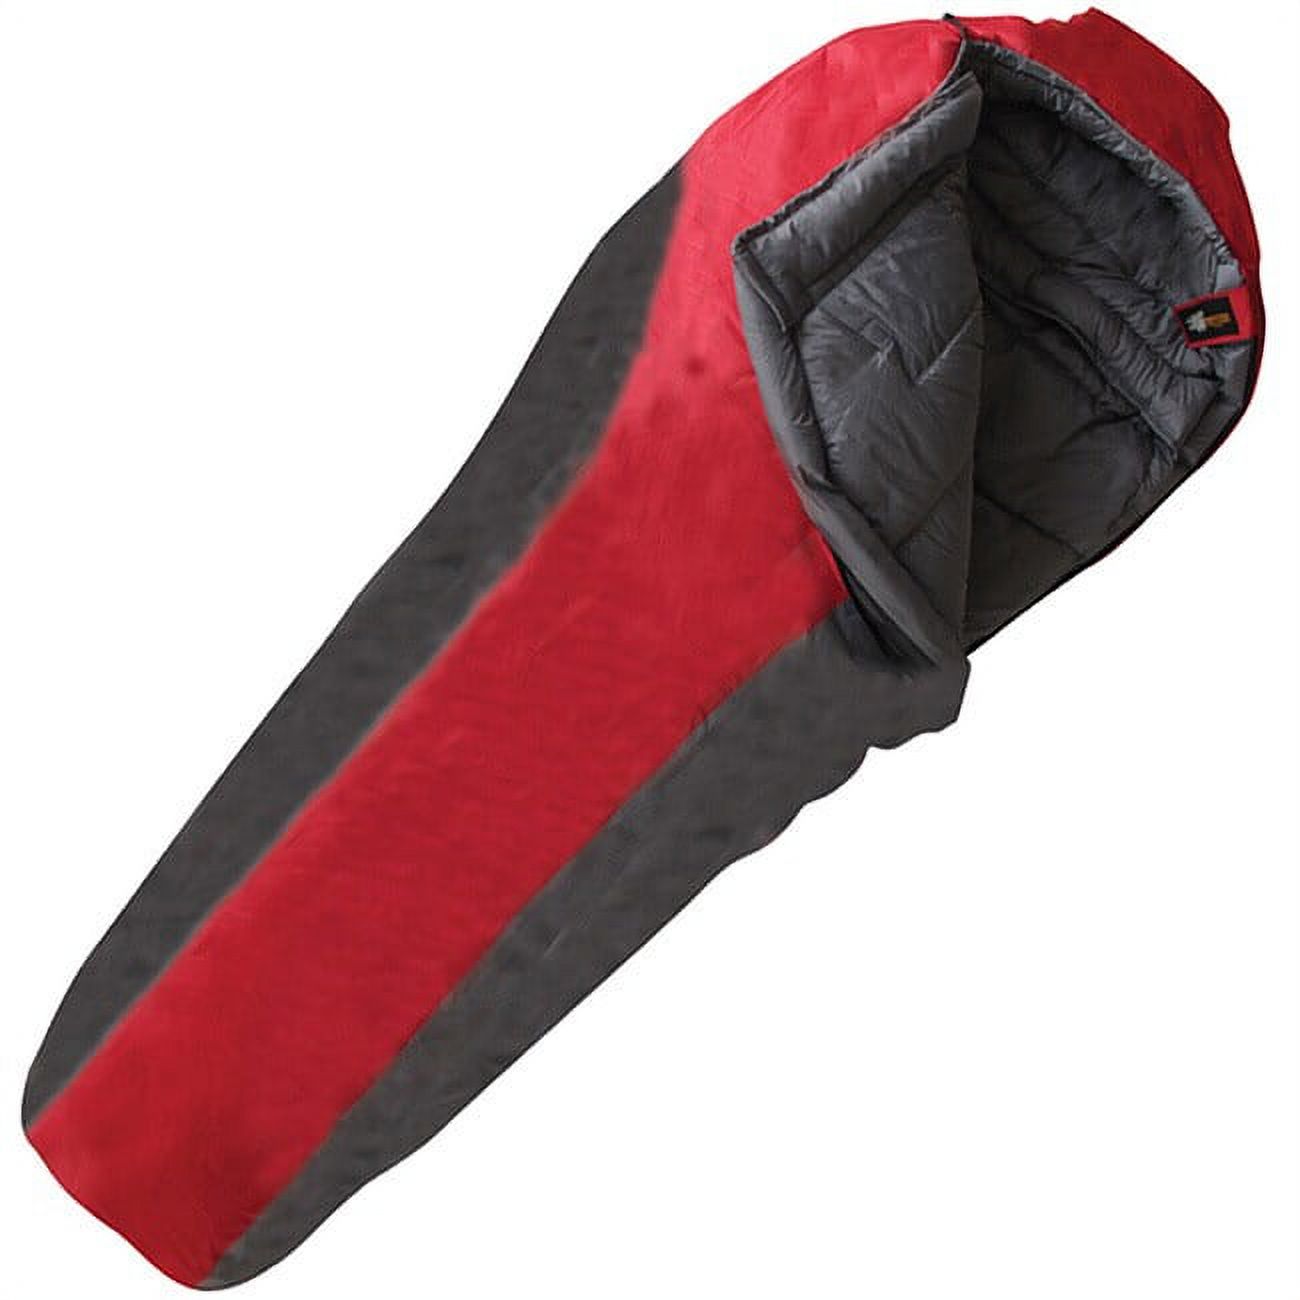 Moose Country Gear F0MD Frontier 0 Degree Midsize Sleeping Bag - image 2 of 2